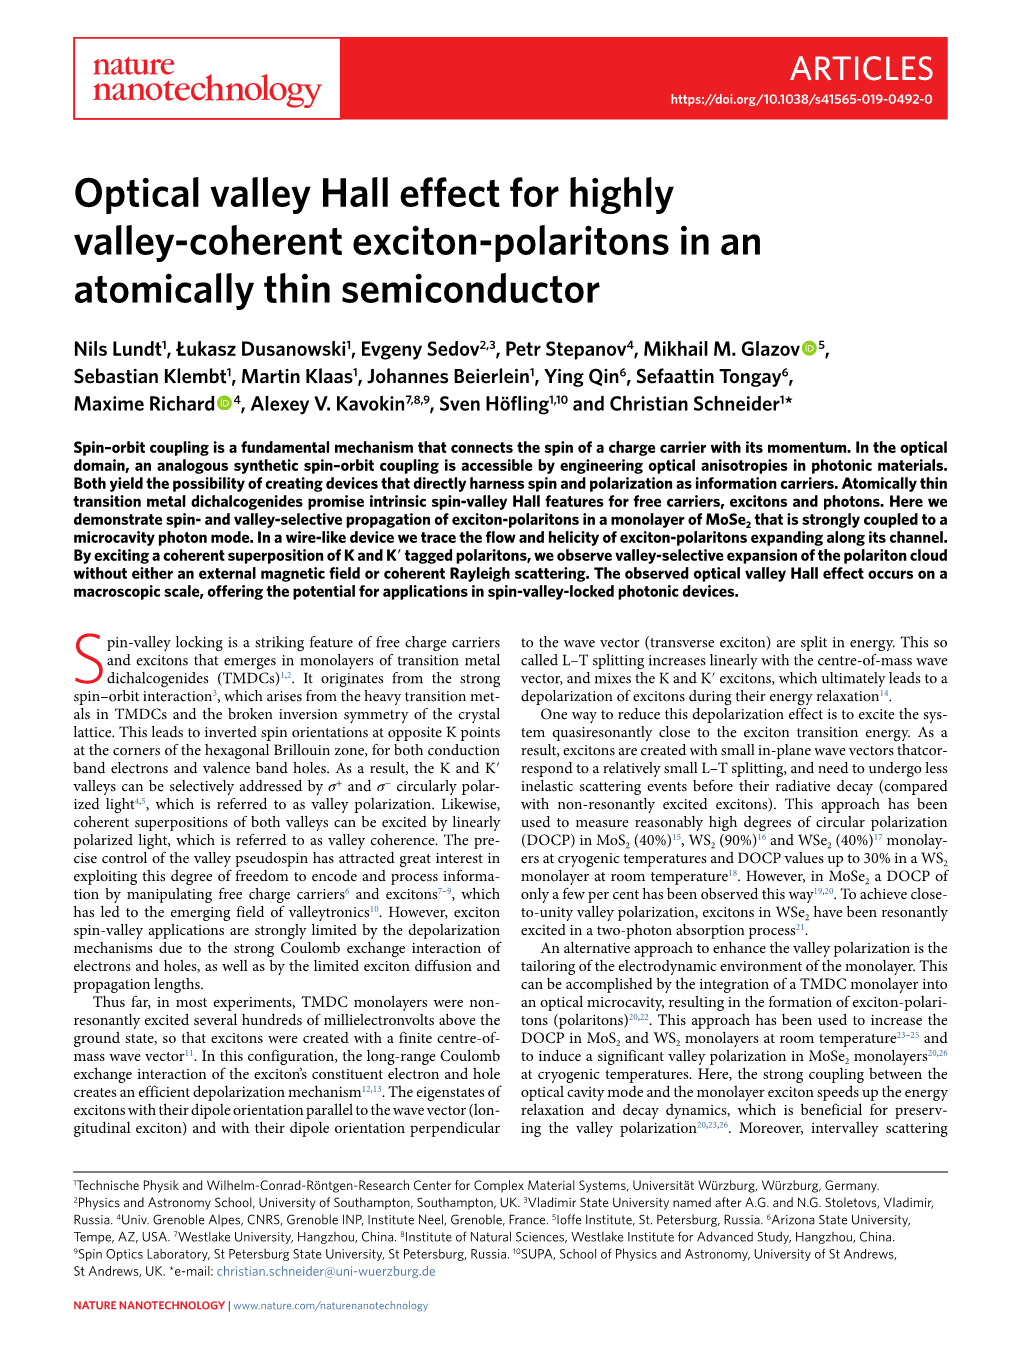 Optical Valley Hall Effect for Highly Valley-Coherent Exciton-Polaritons in an Atomically Thin Semiconductor